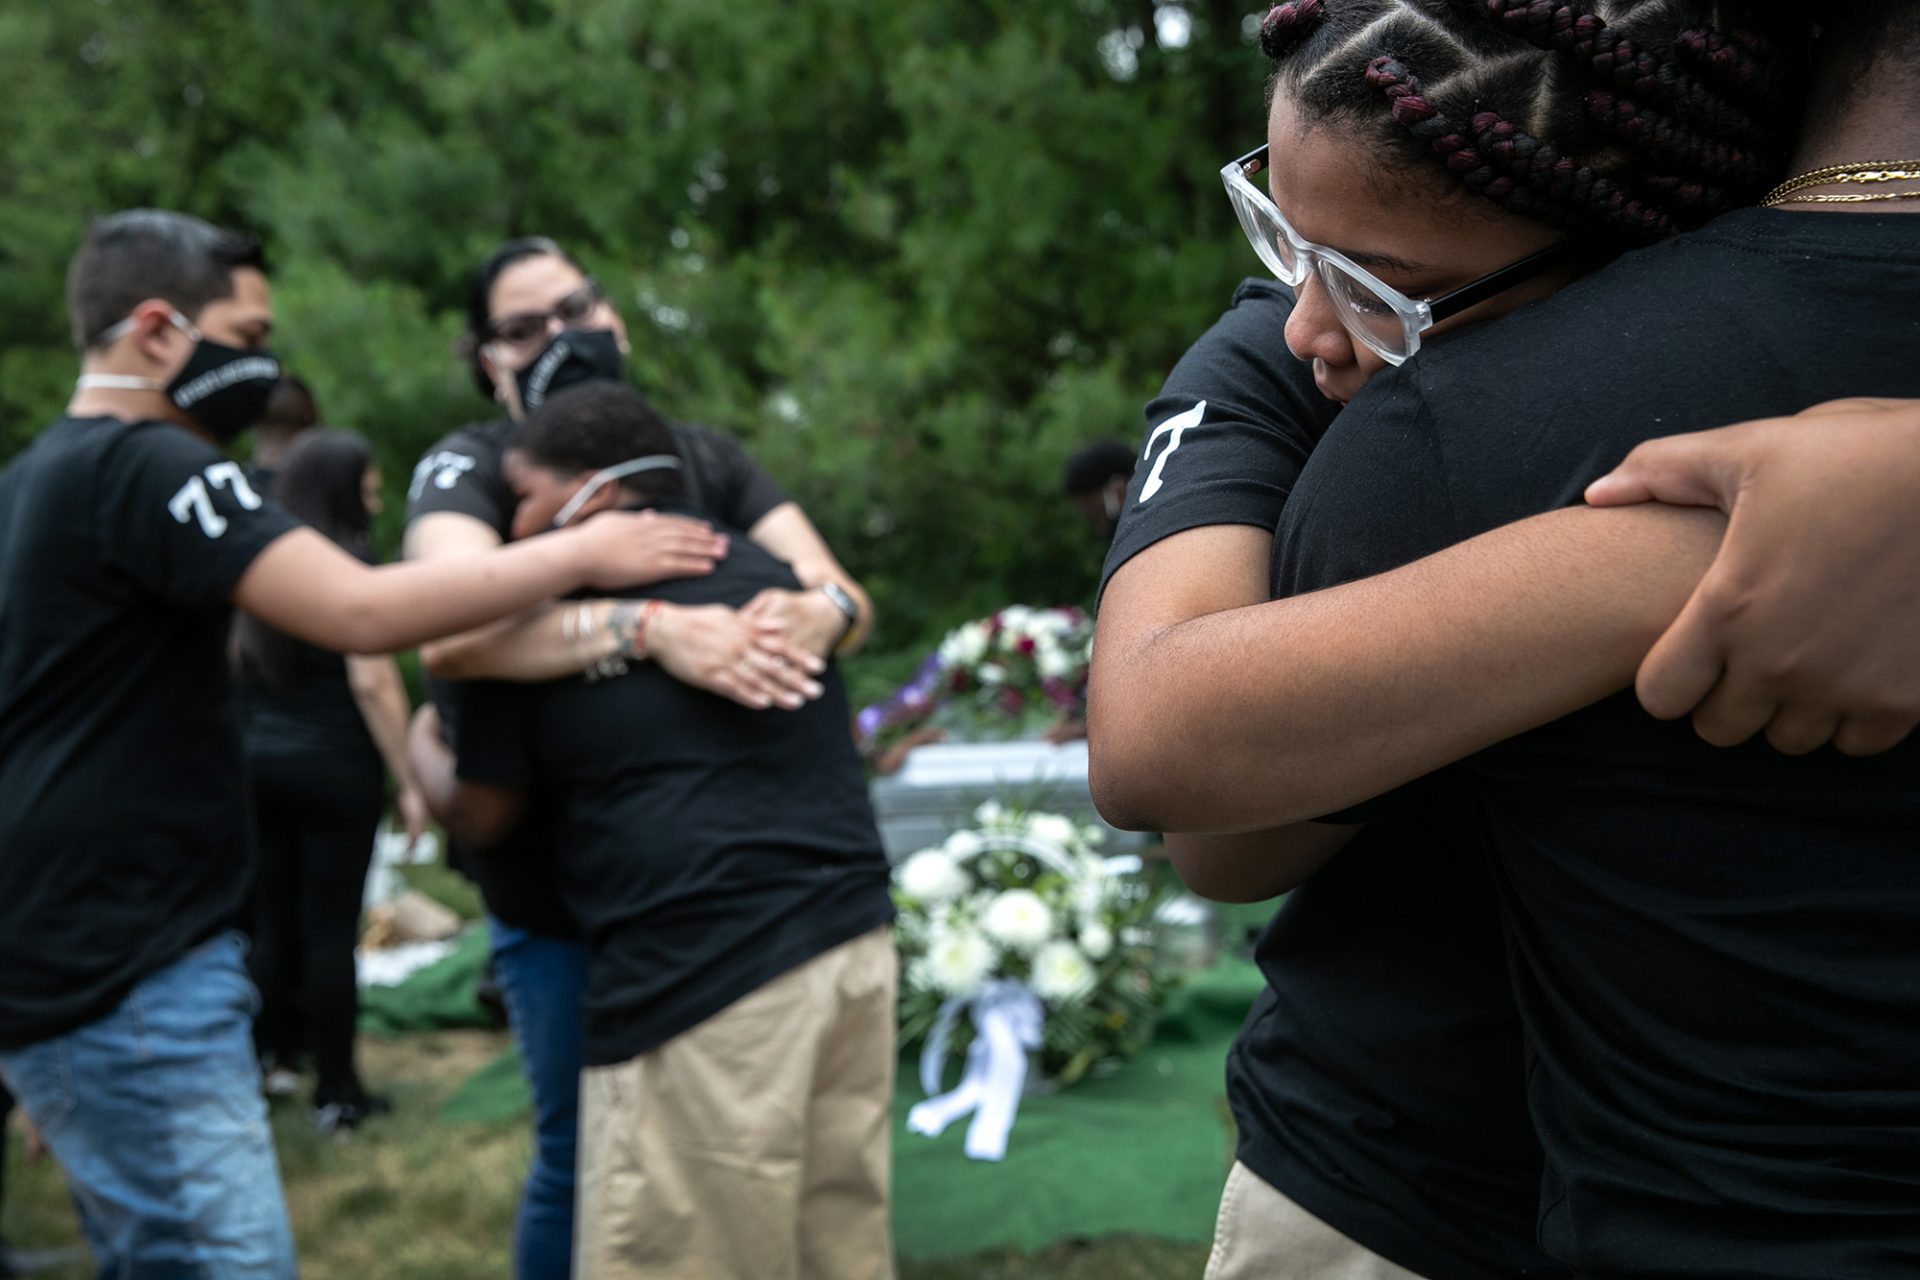 Family members mourn the death of Conrad Coleman Jr. at his burial on July 3, in Rye, N.Y. Coleman, 39, died of Covid-19 on June 20, just over two months after his father Conrad Coleman Sr. also died of the disease.